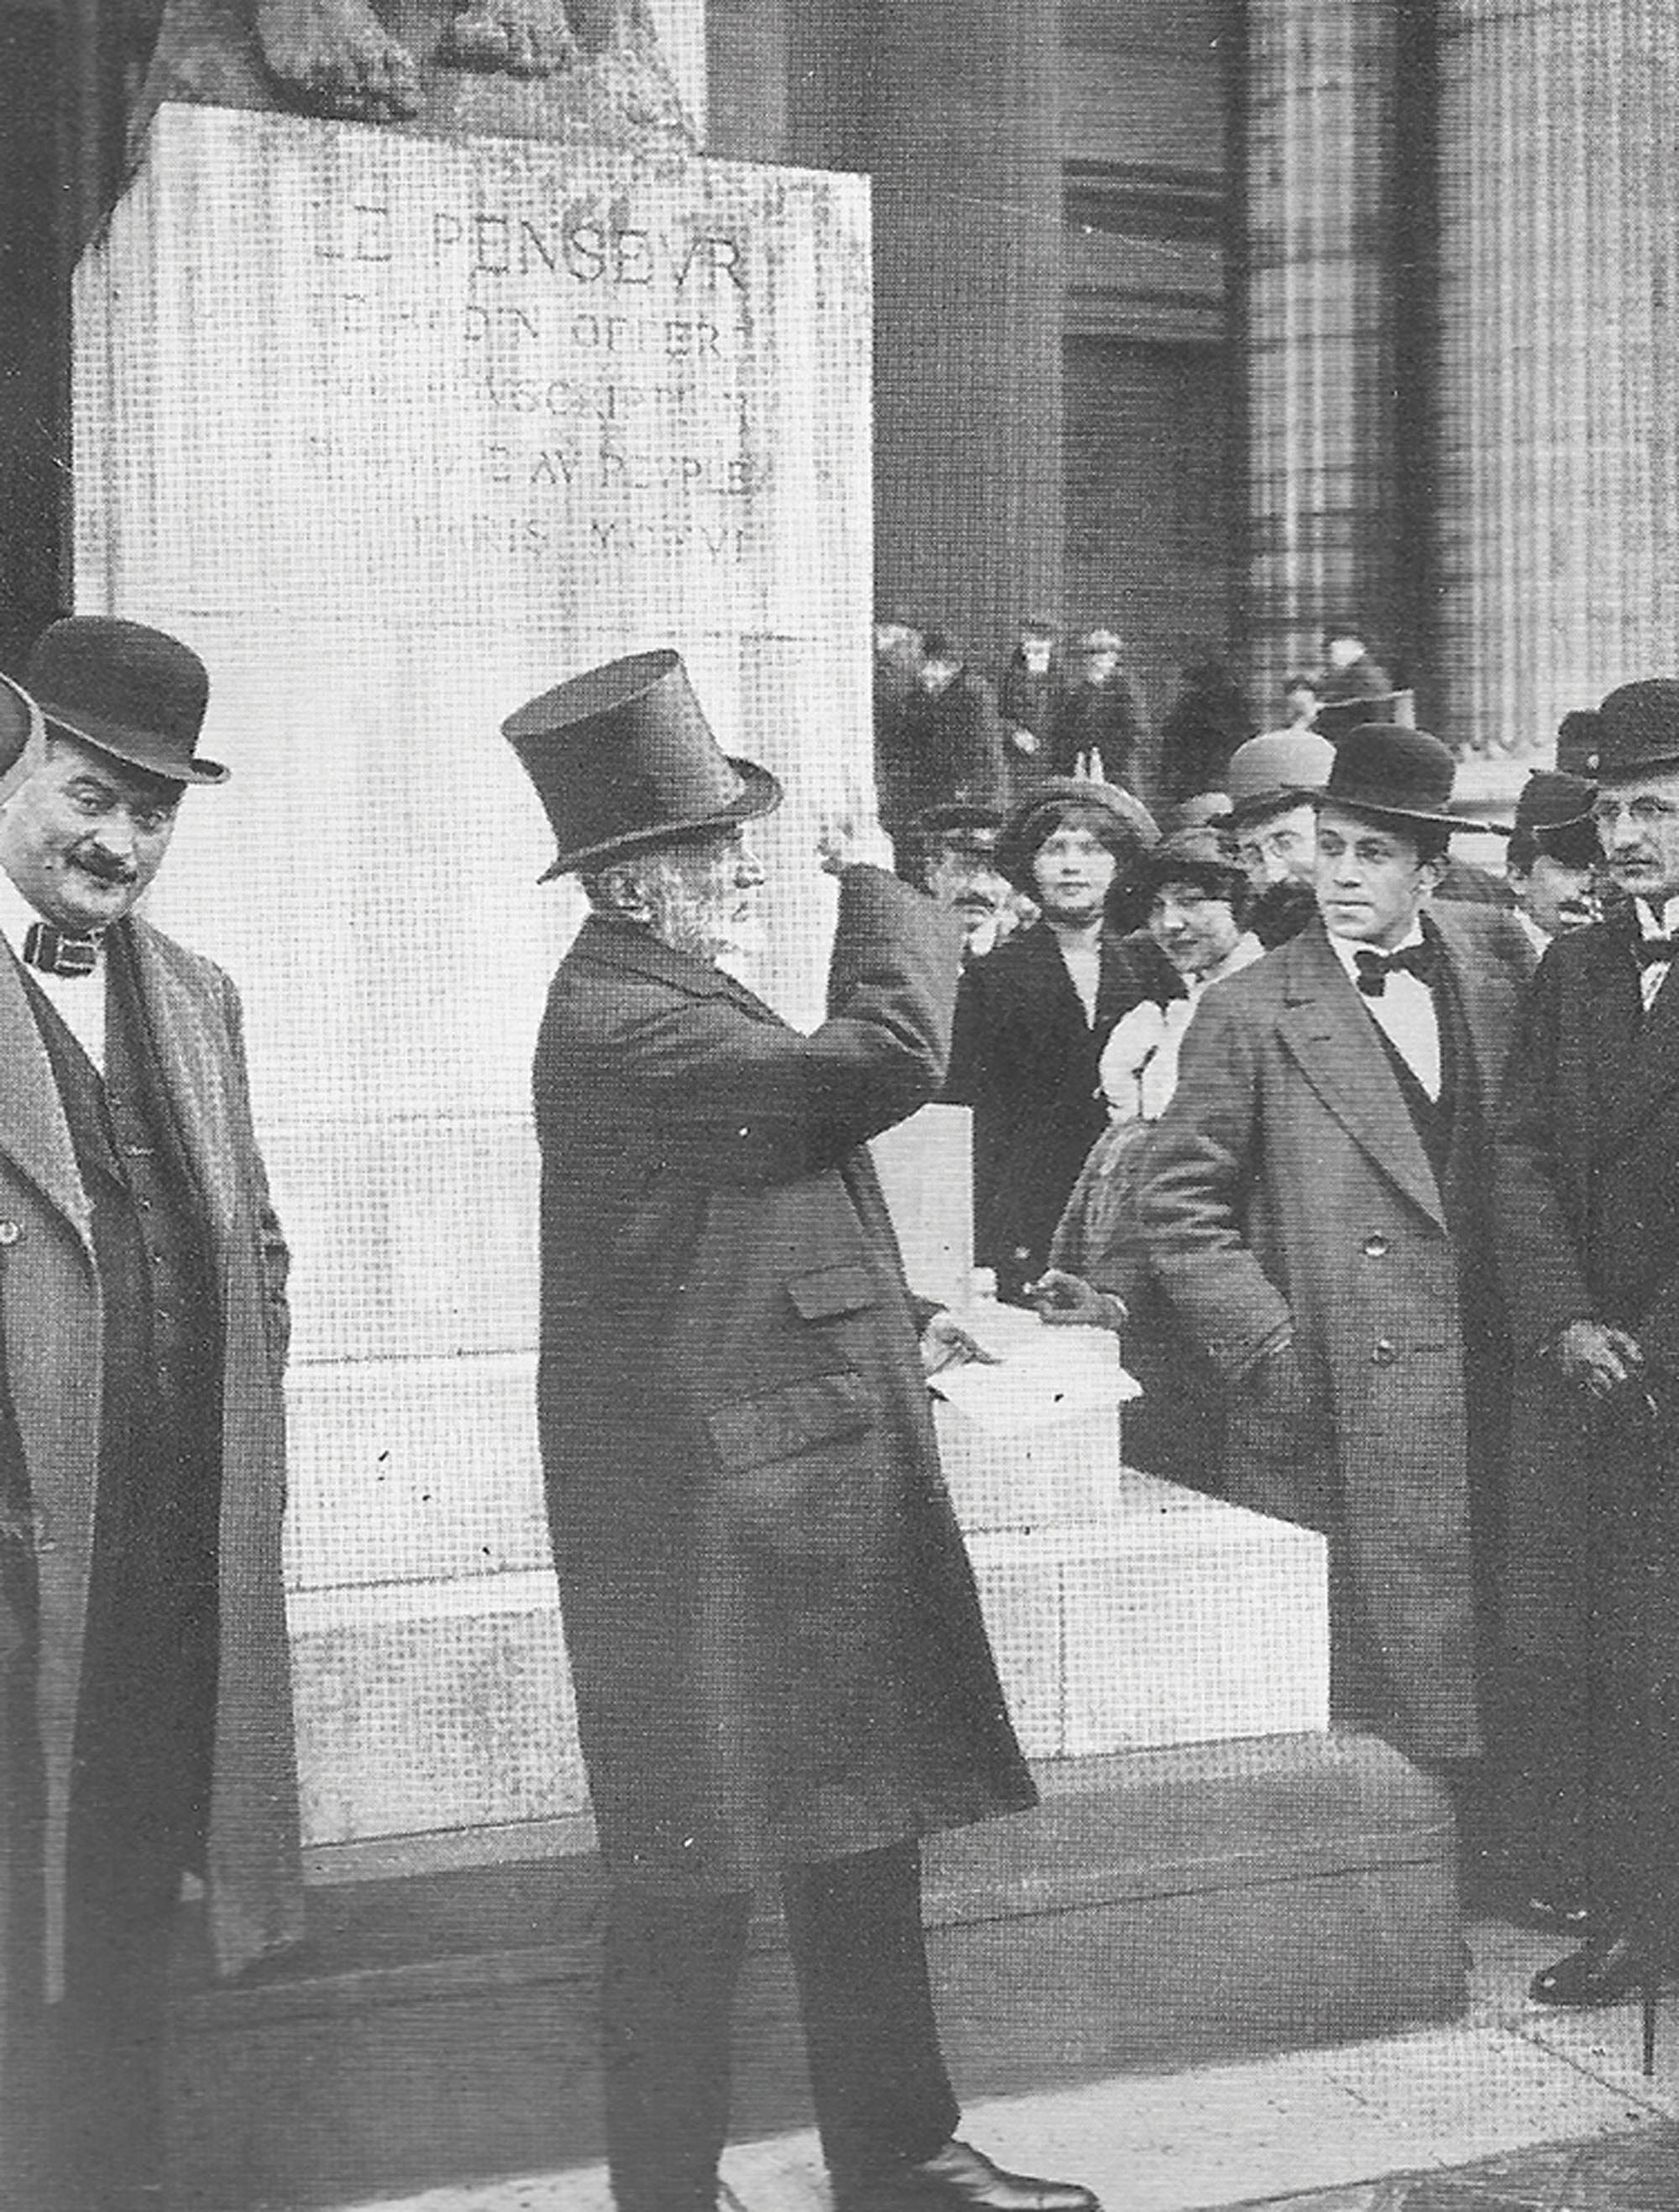 A photograph of Jean-Pierre Brisset addressing a crowd in front of Rodin’s Thinker at the Pantheon on the 13th of April nineteen thirteen. 